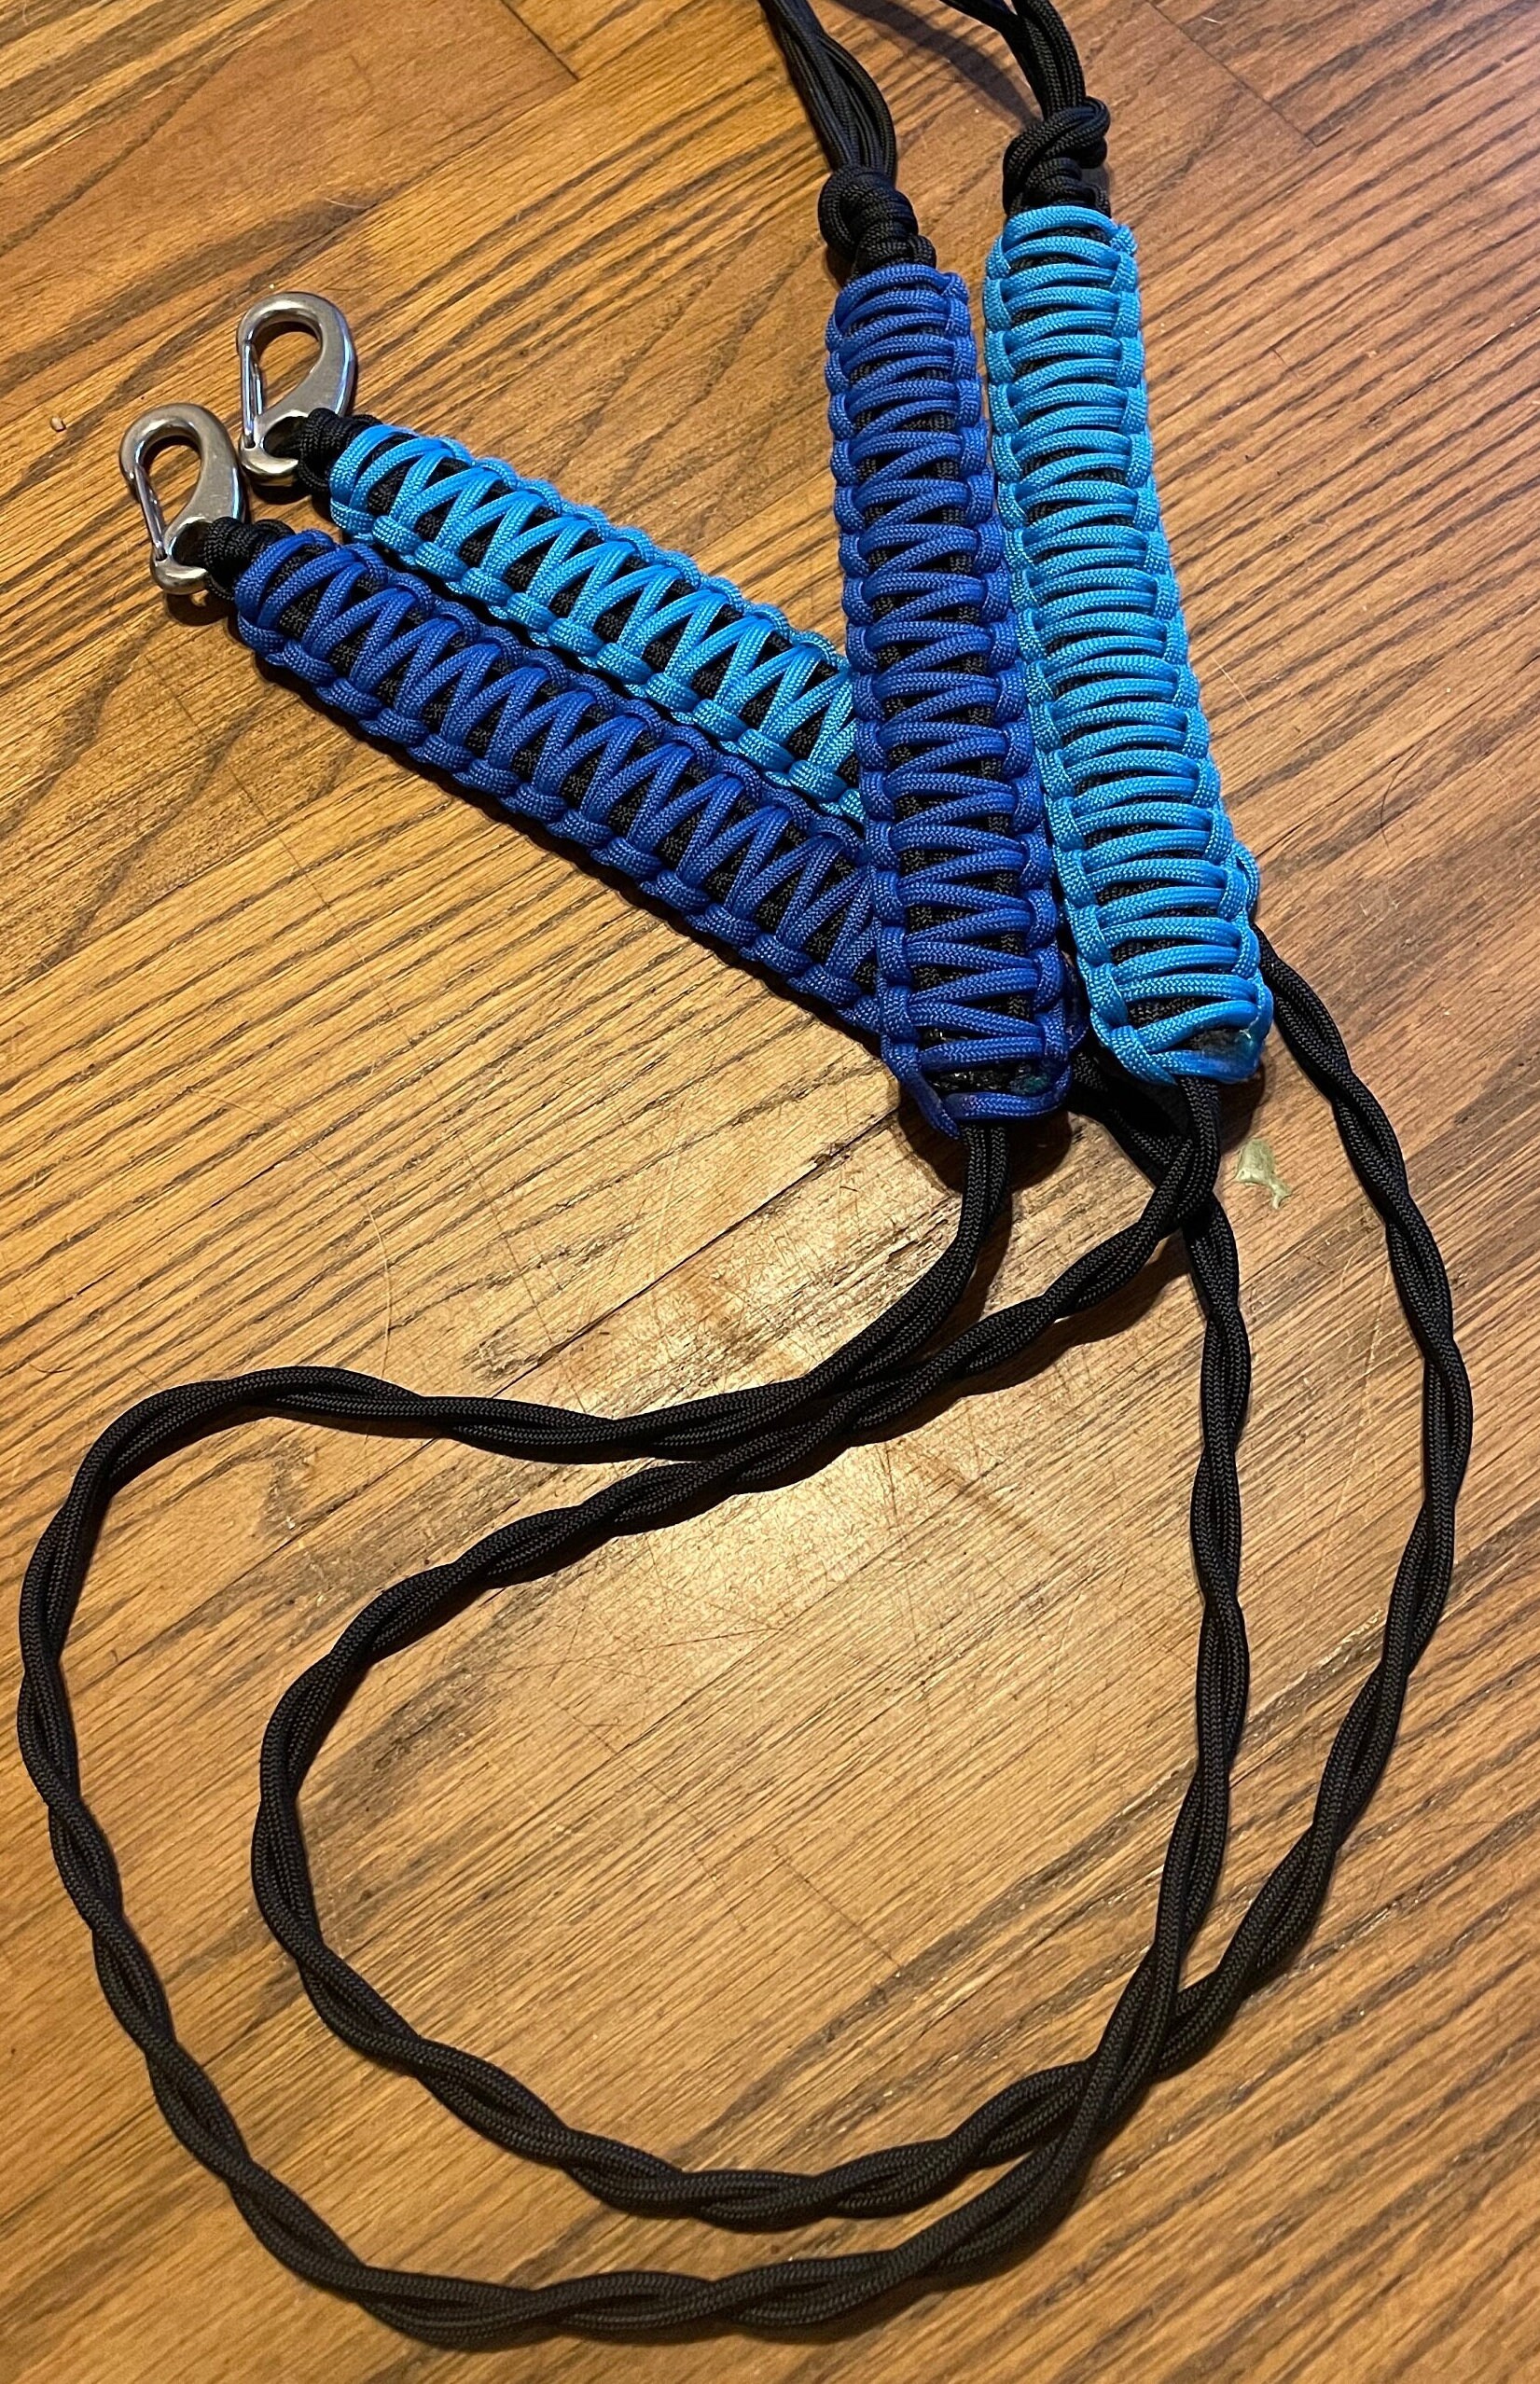 Rod and Reel Leash-1100 Lb Tensile-custom to Order 2 to 8 Ft W/ 316 SS &  550 Paracord-design 4. 